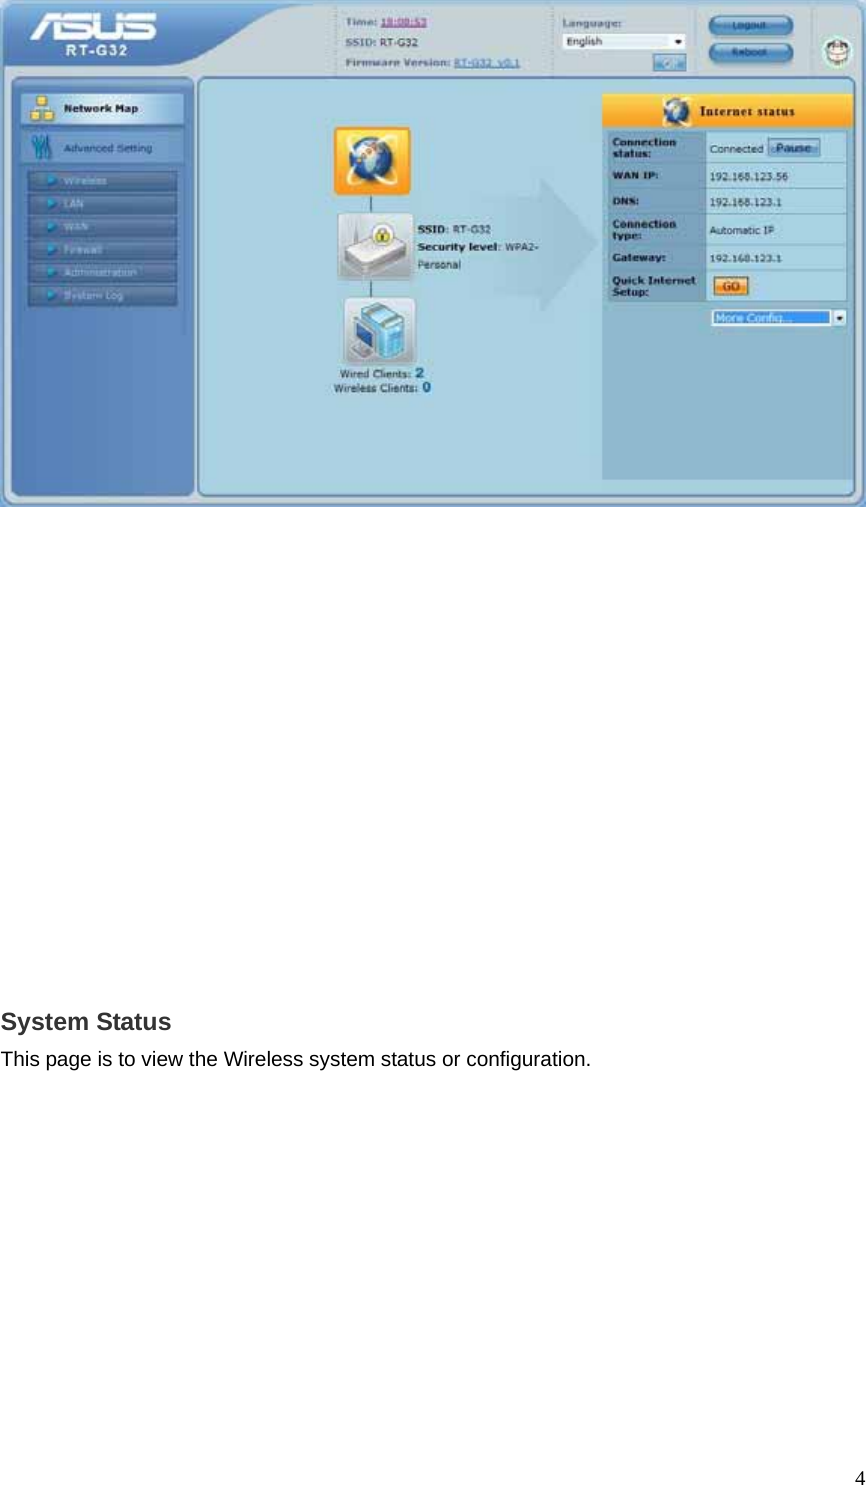  4              System Status This page is to view the Wireless system status or configuration.   